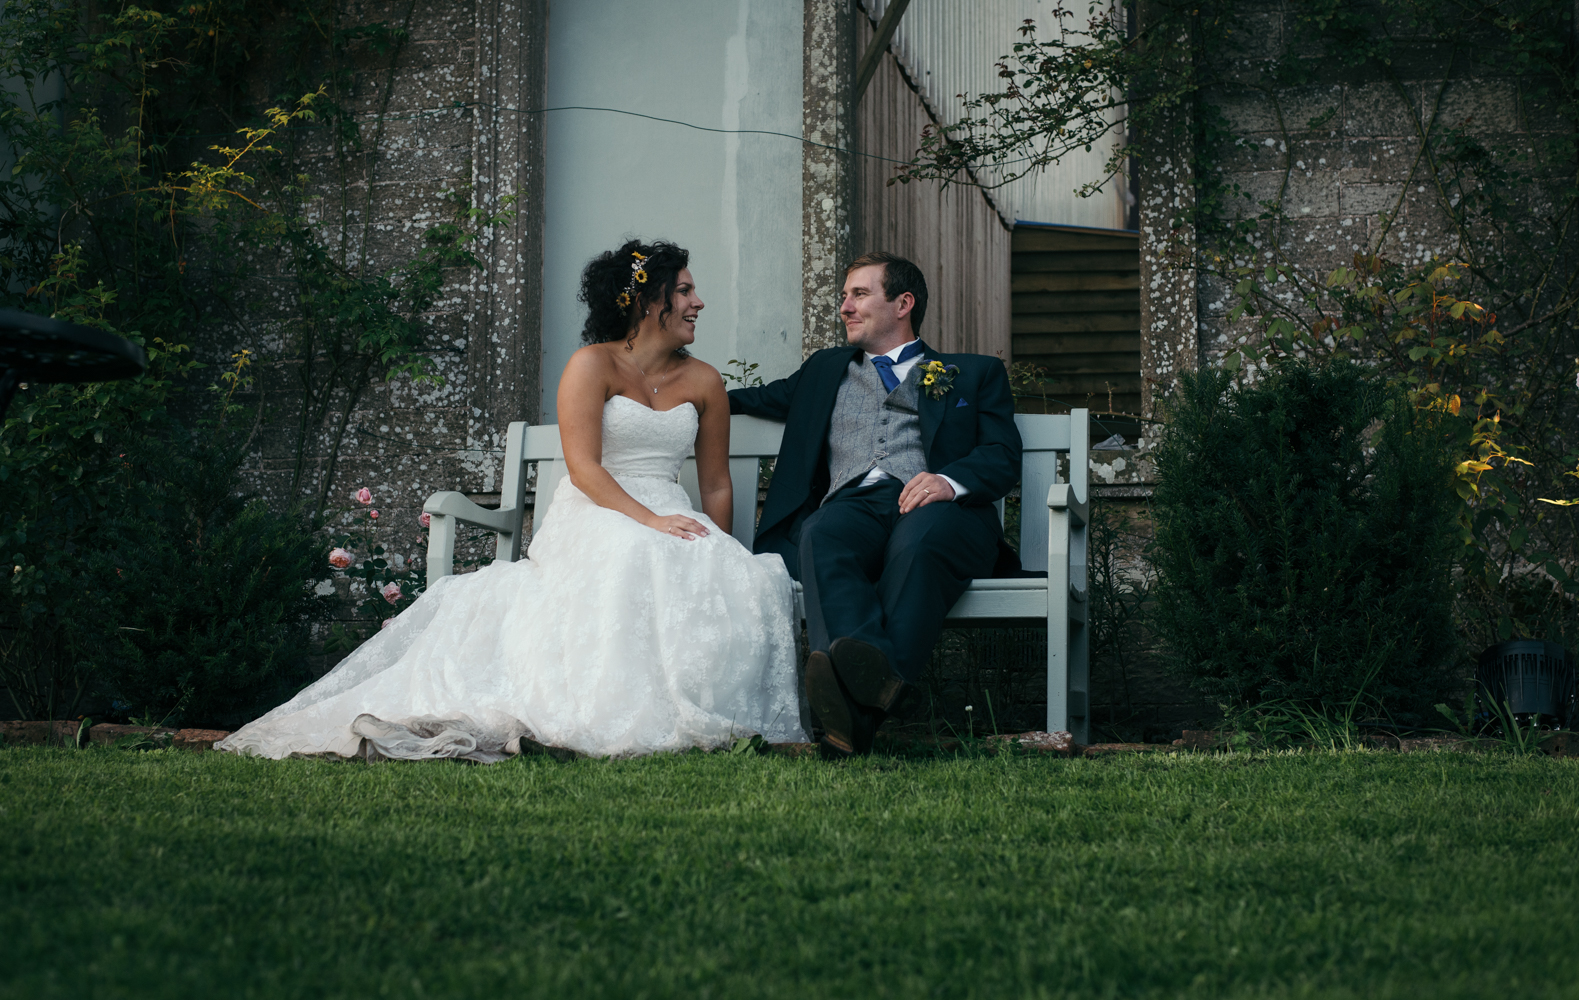 The bride and groom taking a relaxing break for couples portraits